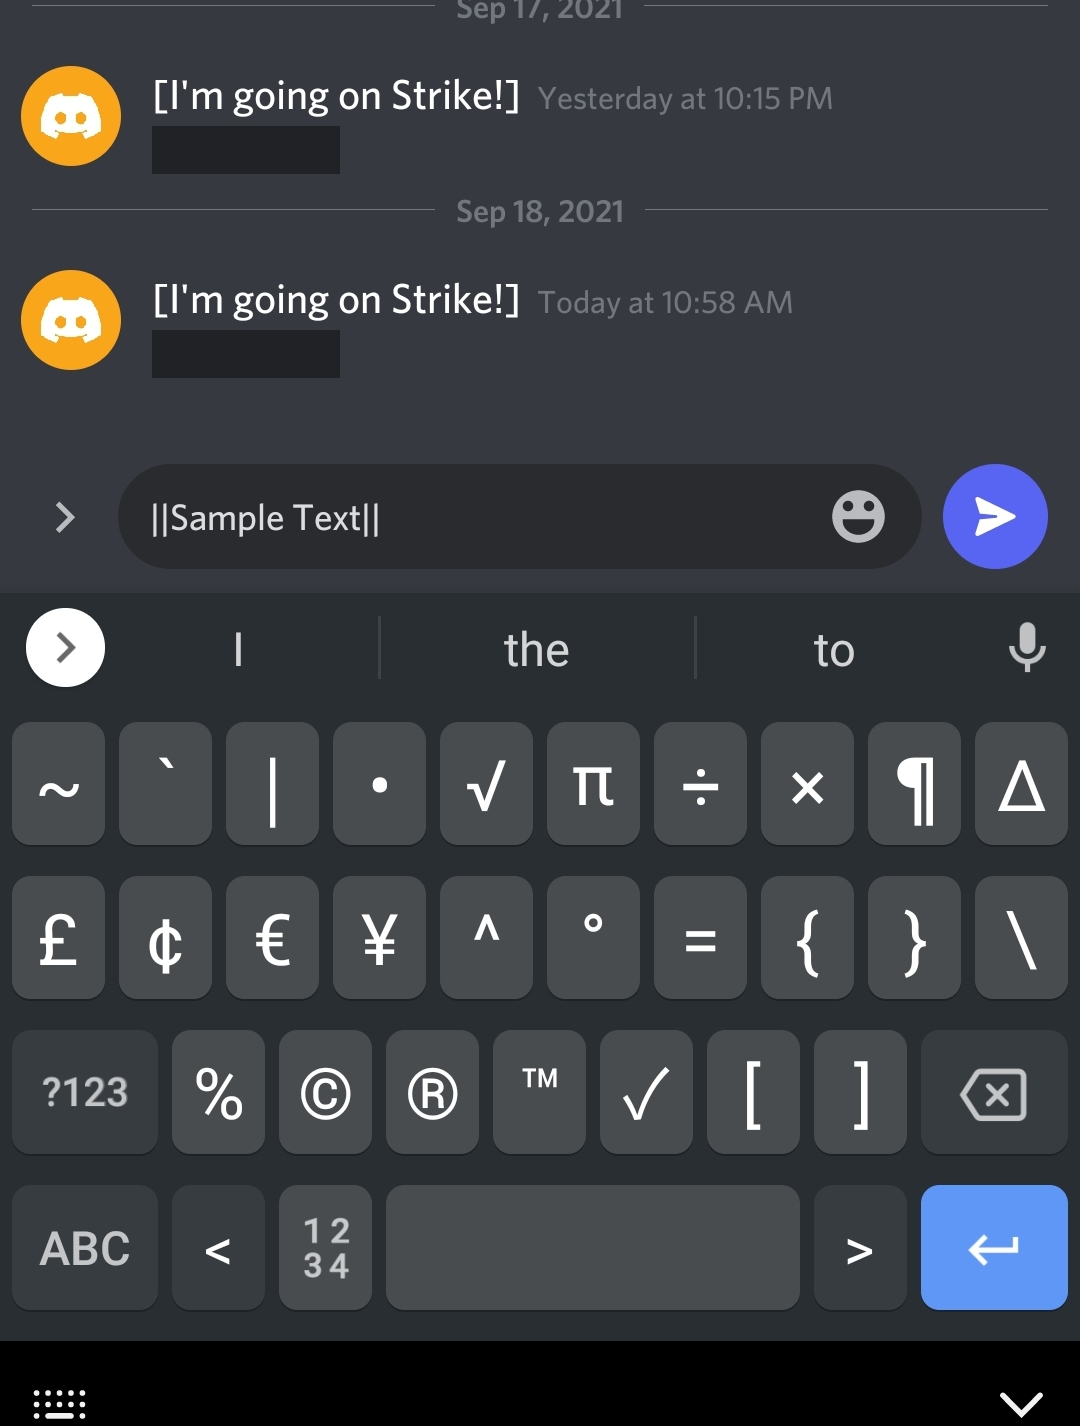 How To Make a Spoiler Text or Image on Discord - GeeksforGeeks